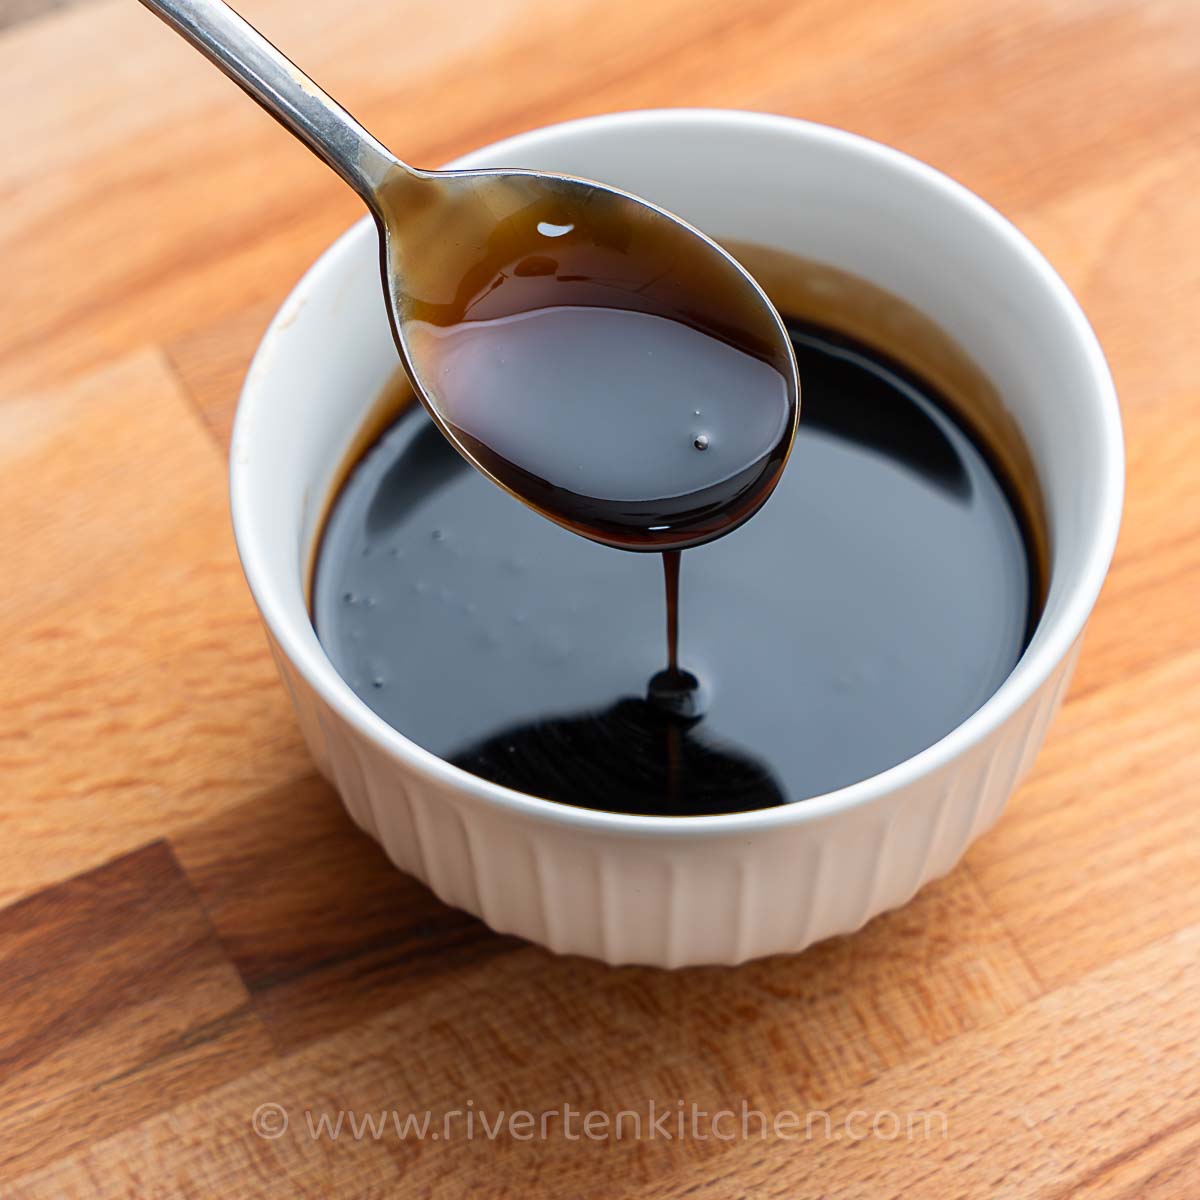 teriyaki sauce that can be use for marinating meat, sauce for meat, sauce for unagi or eel.